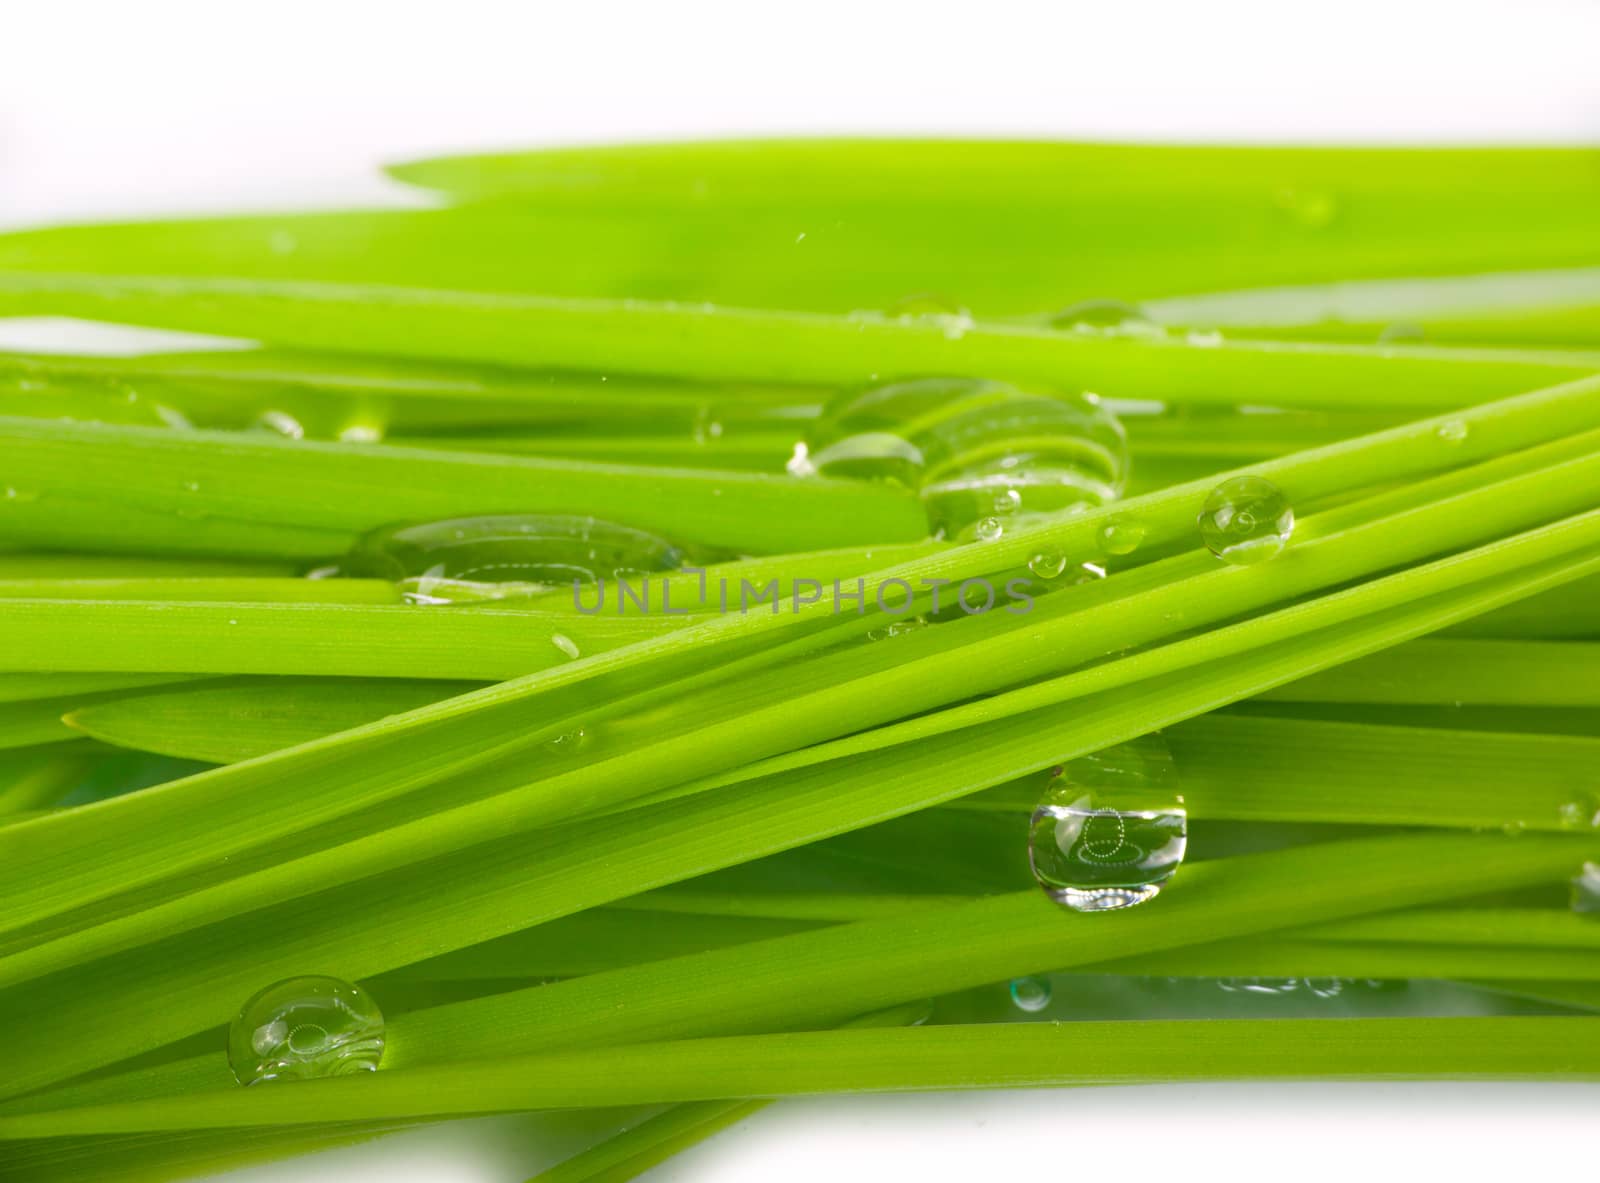 stalks of grass with water drops closeup